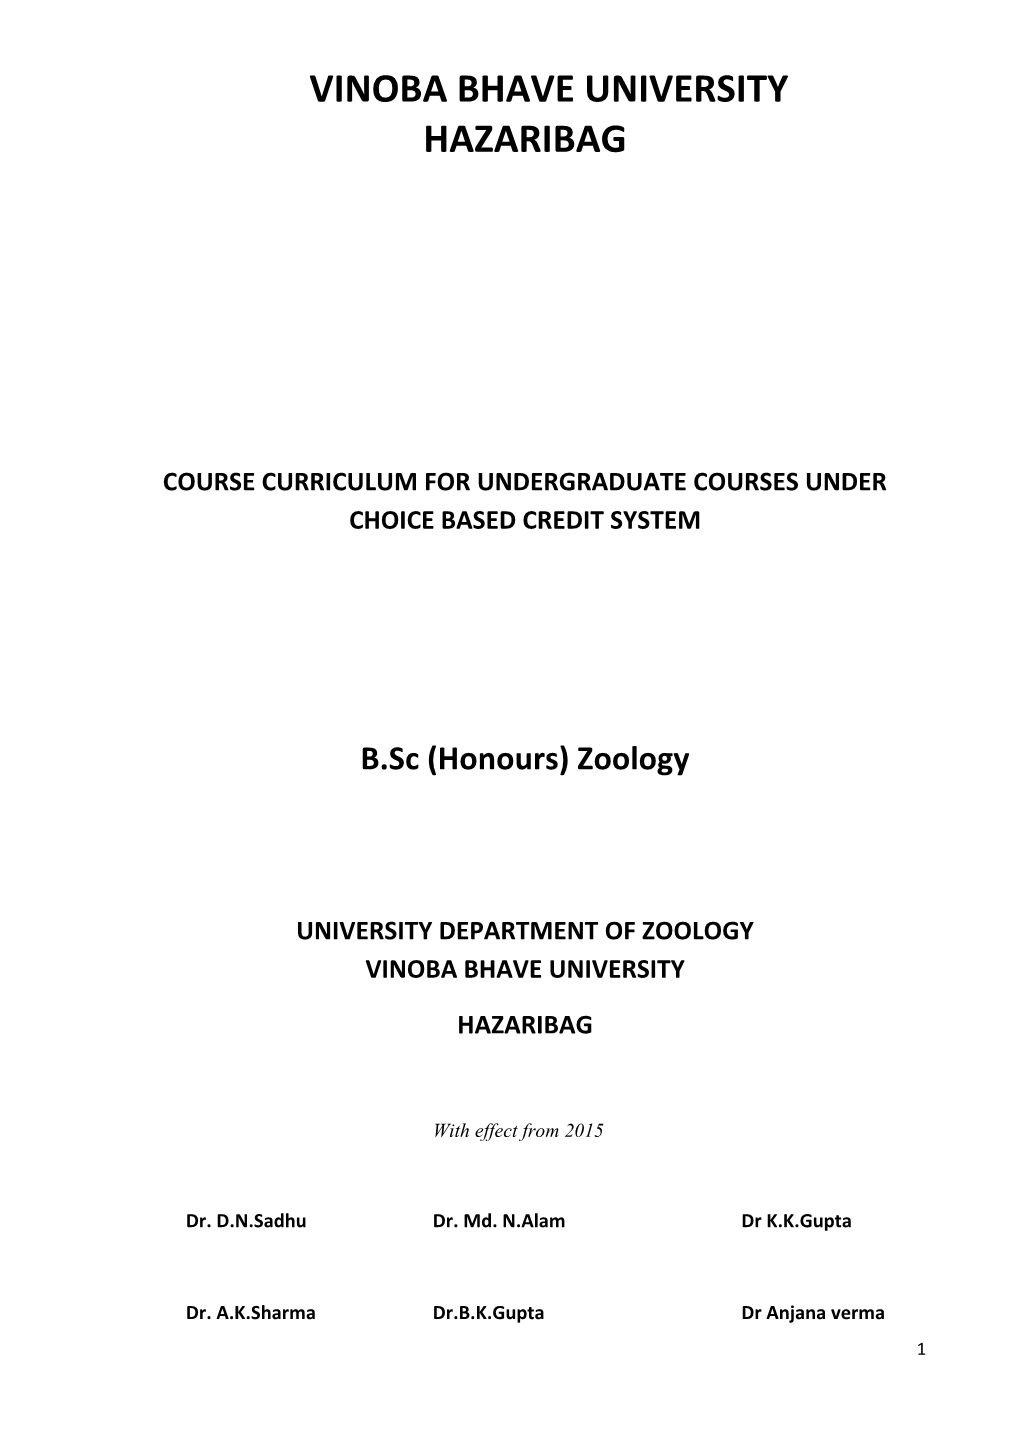 Course Curriculum for Undergraduate Courses Under Choice Based Credit System